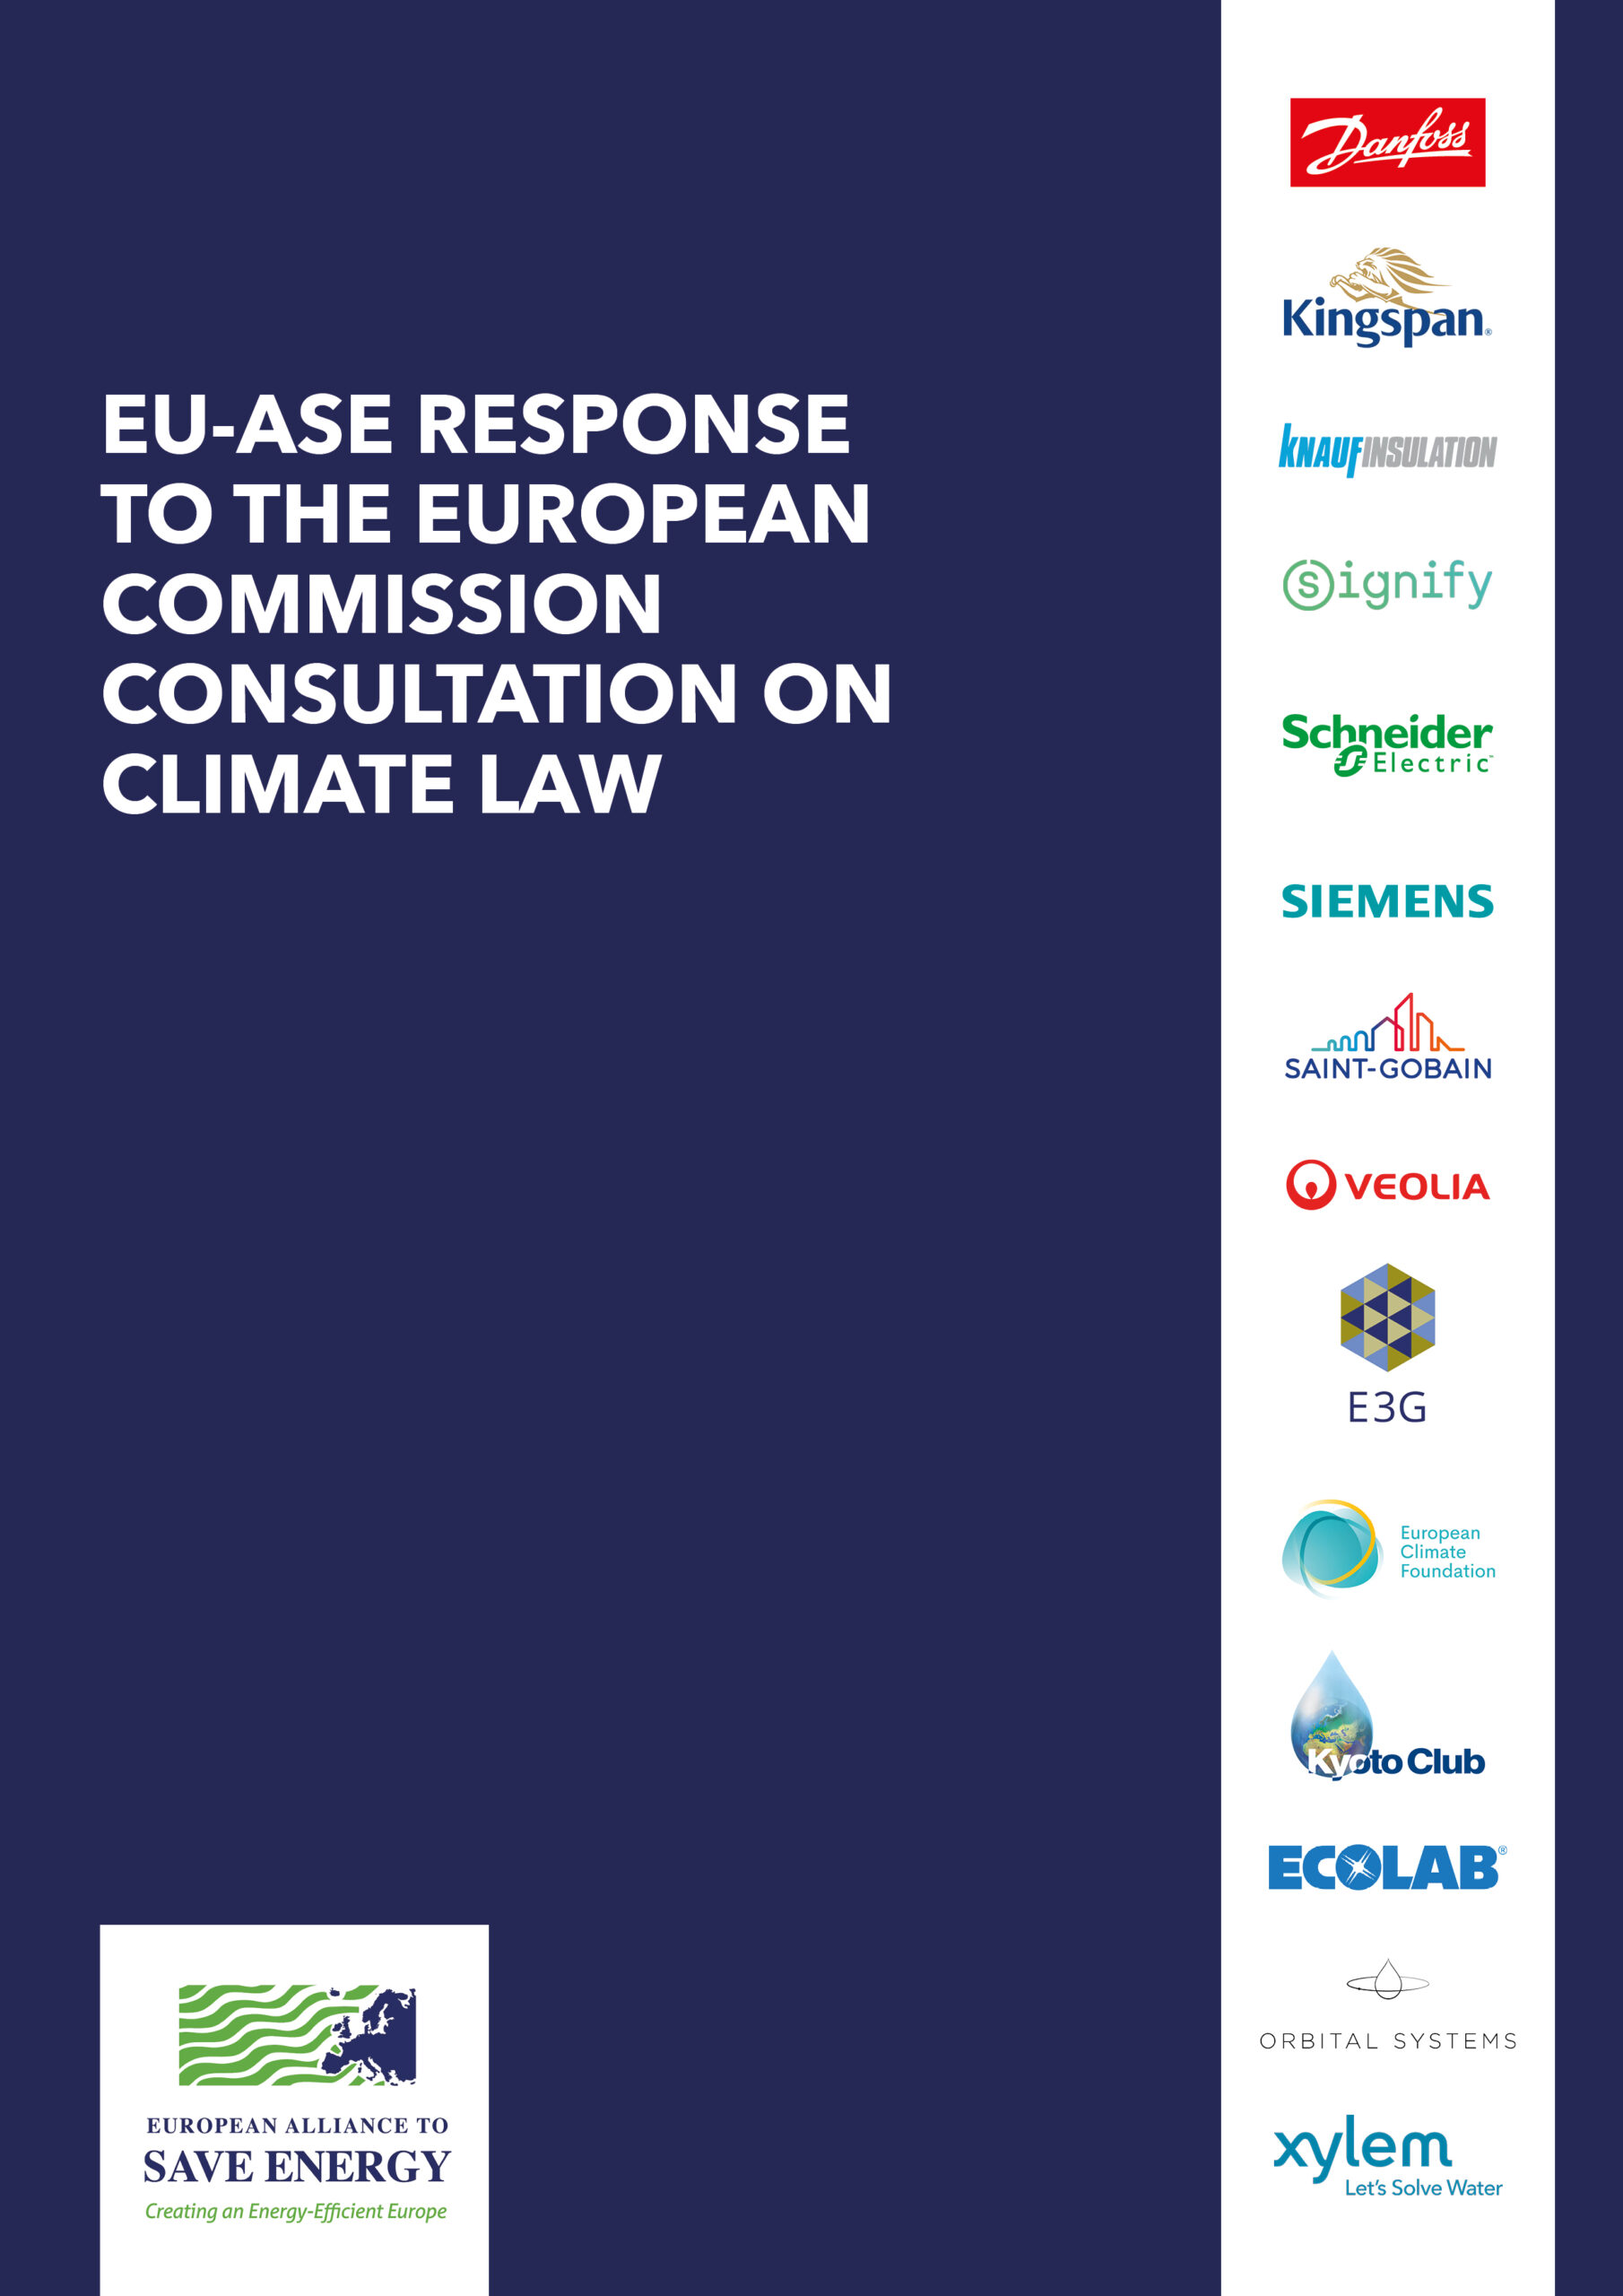 EU-ASE response to European Commission consultation on climate law